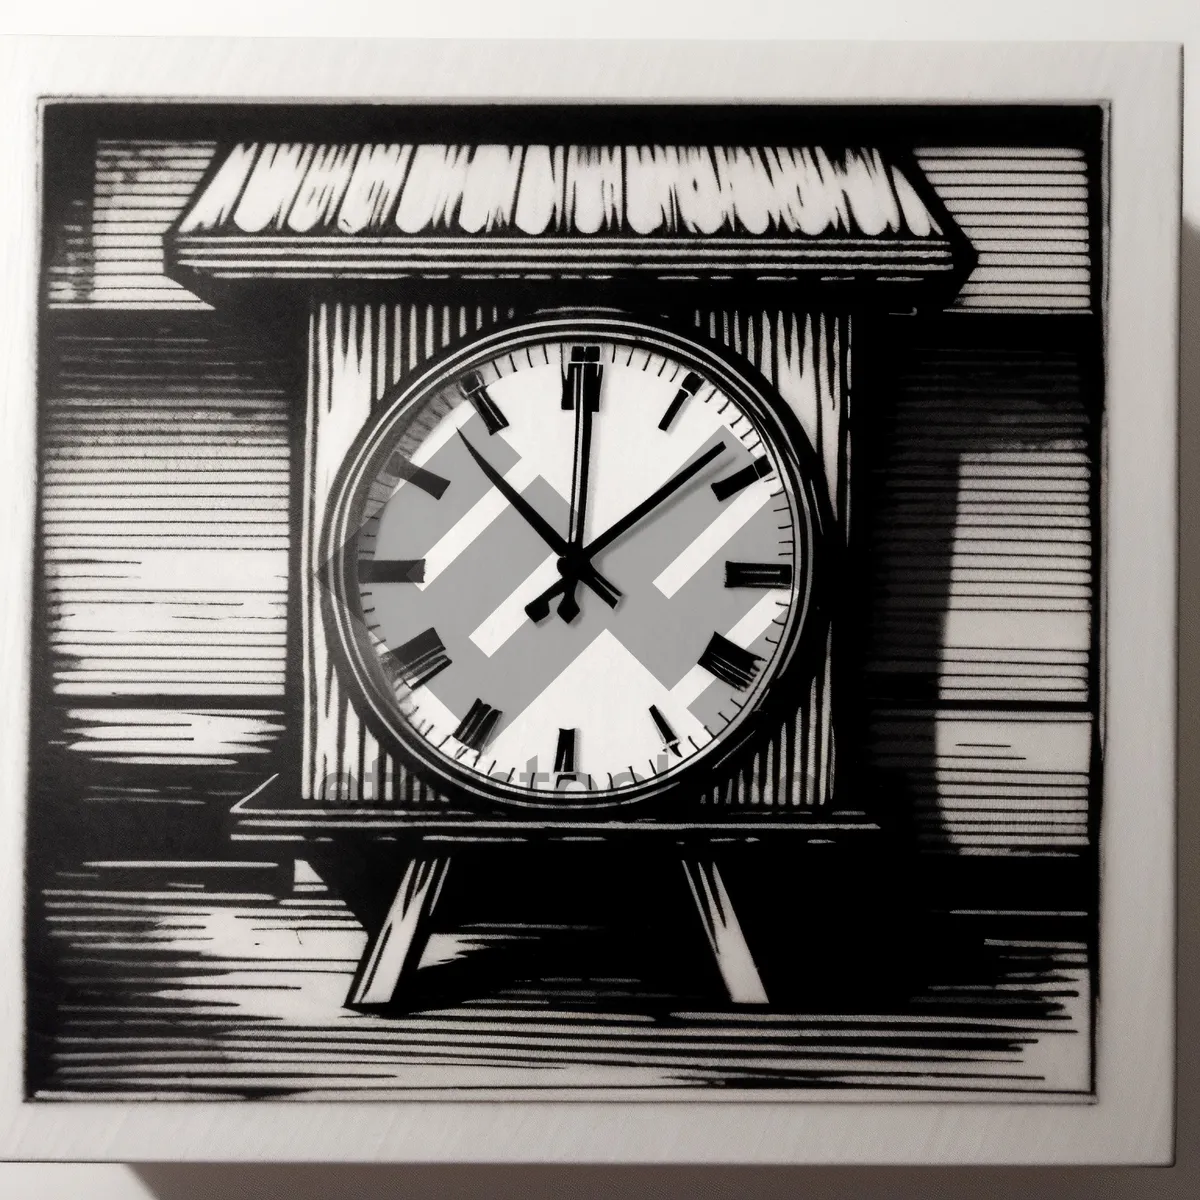 Picture of Vintage Wall Clock with Analog Time Display